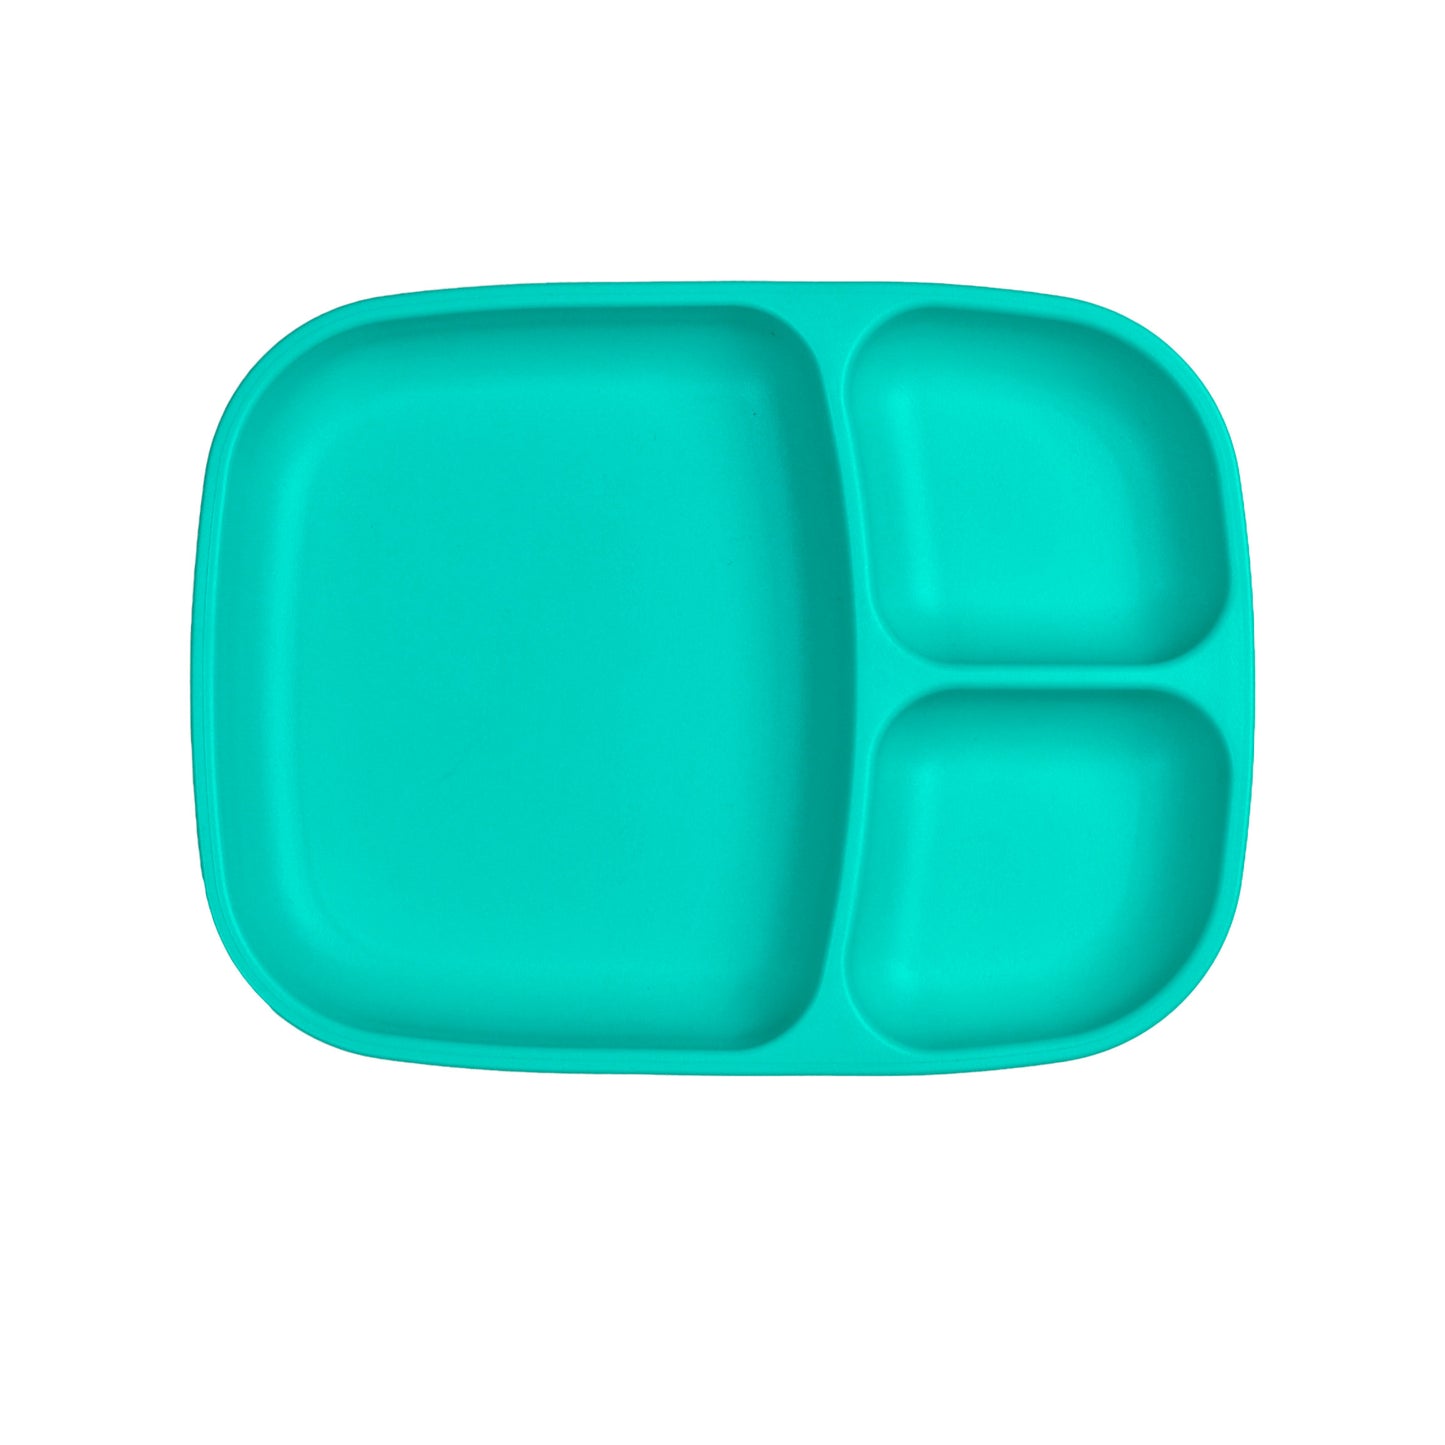 Re-Play Large Divided Plate - Aqua